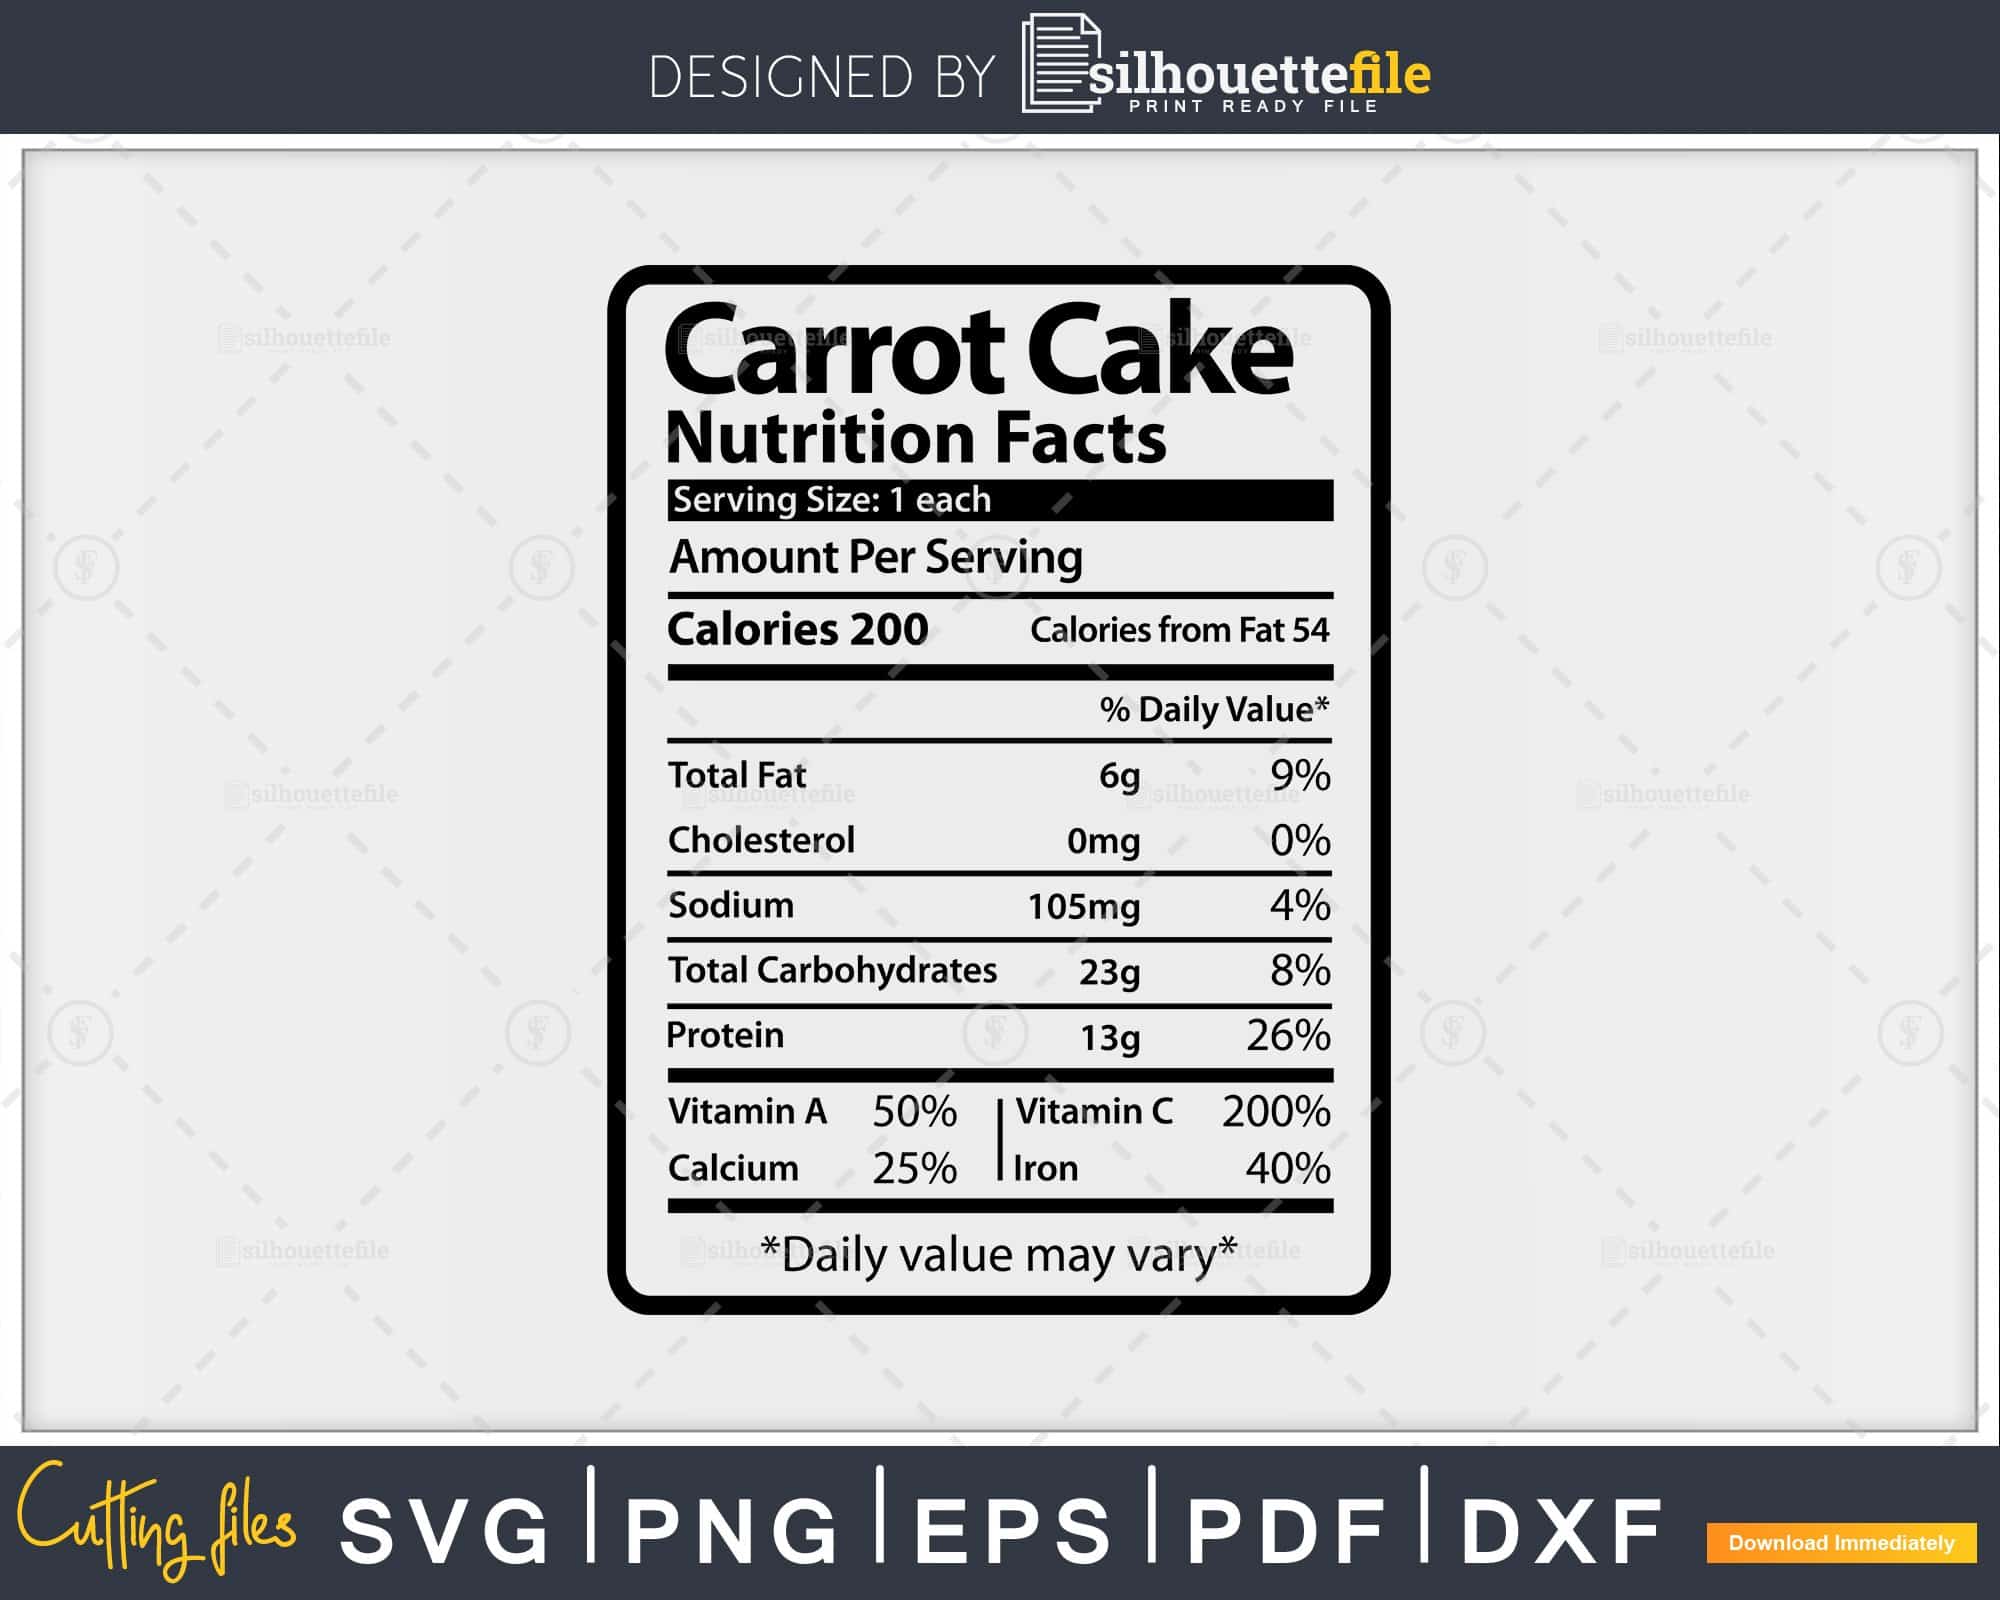 Carrot Cake Nutrition Facts